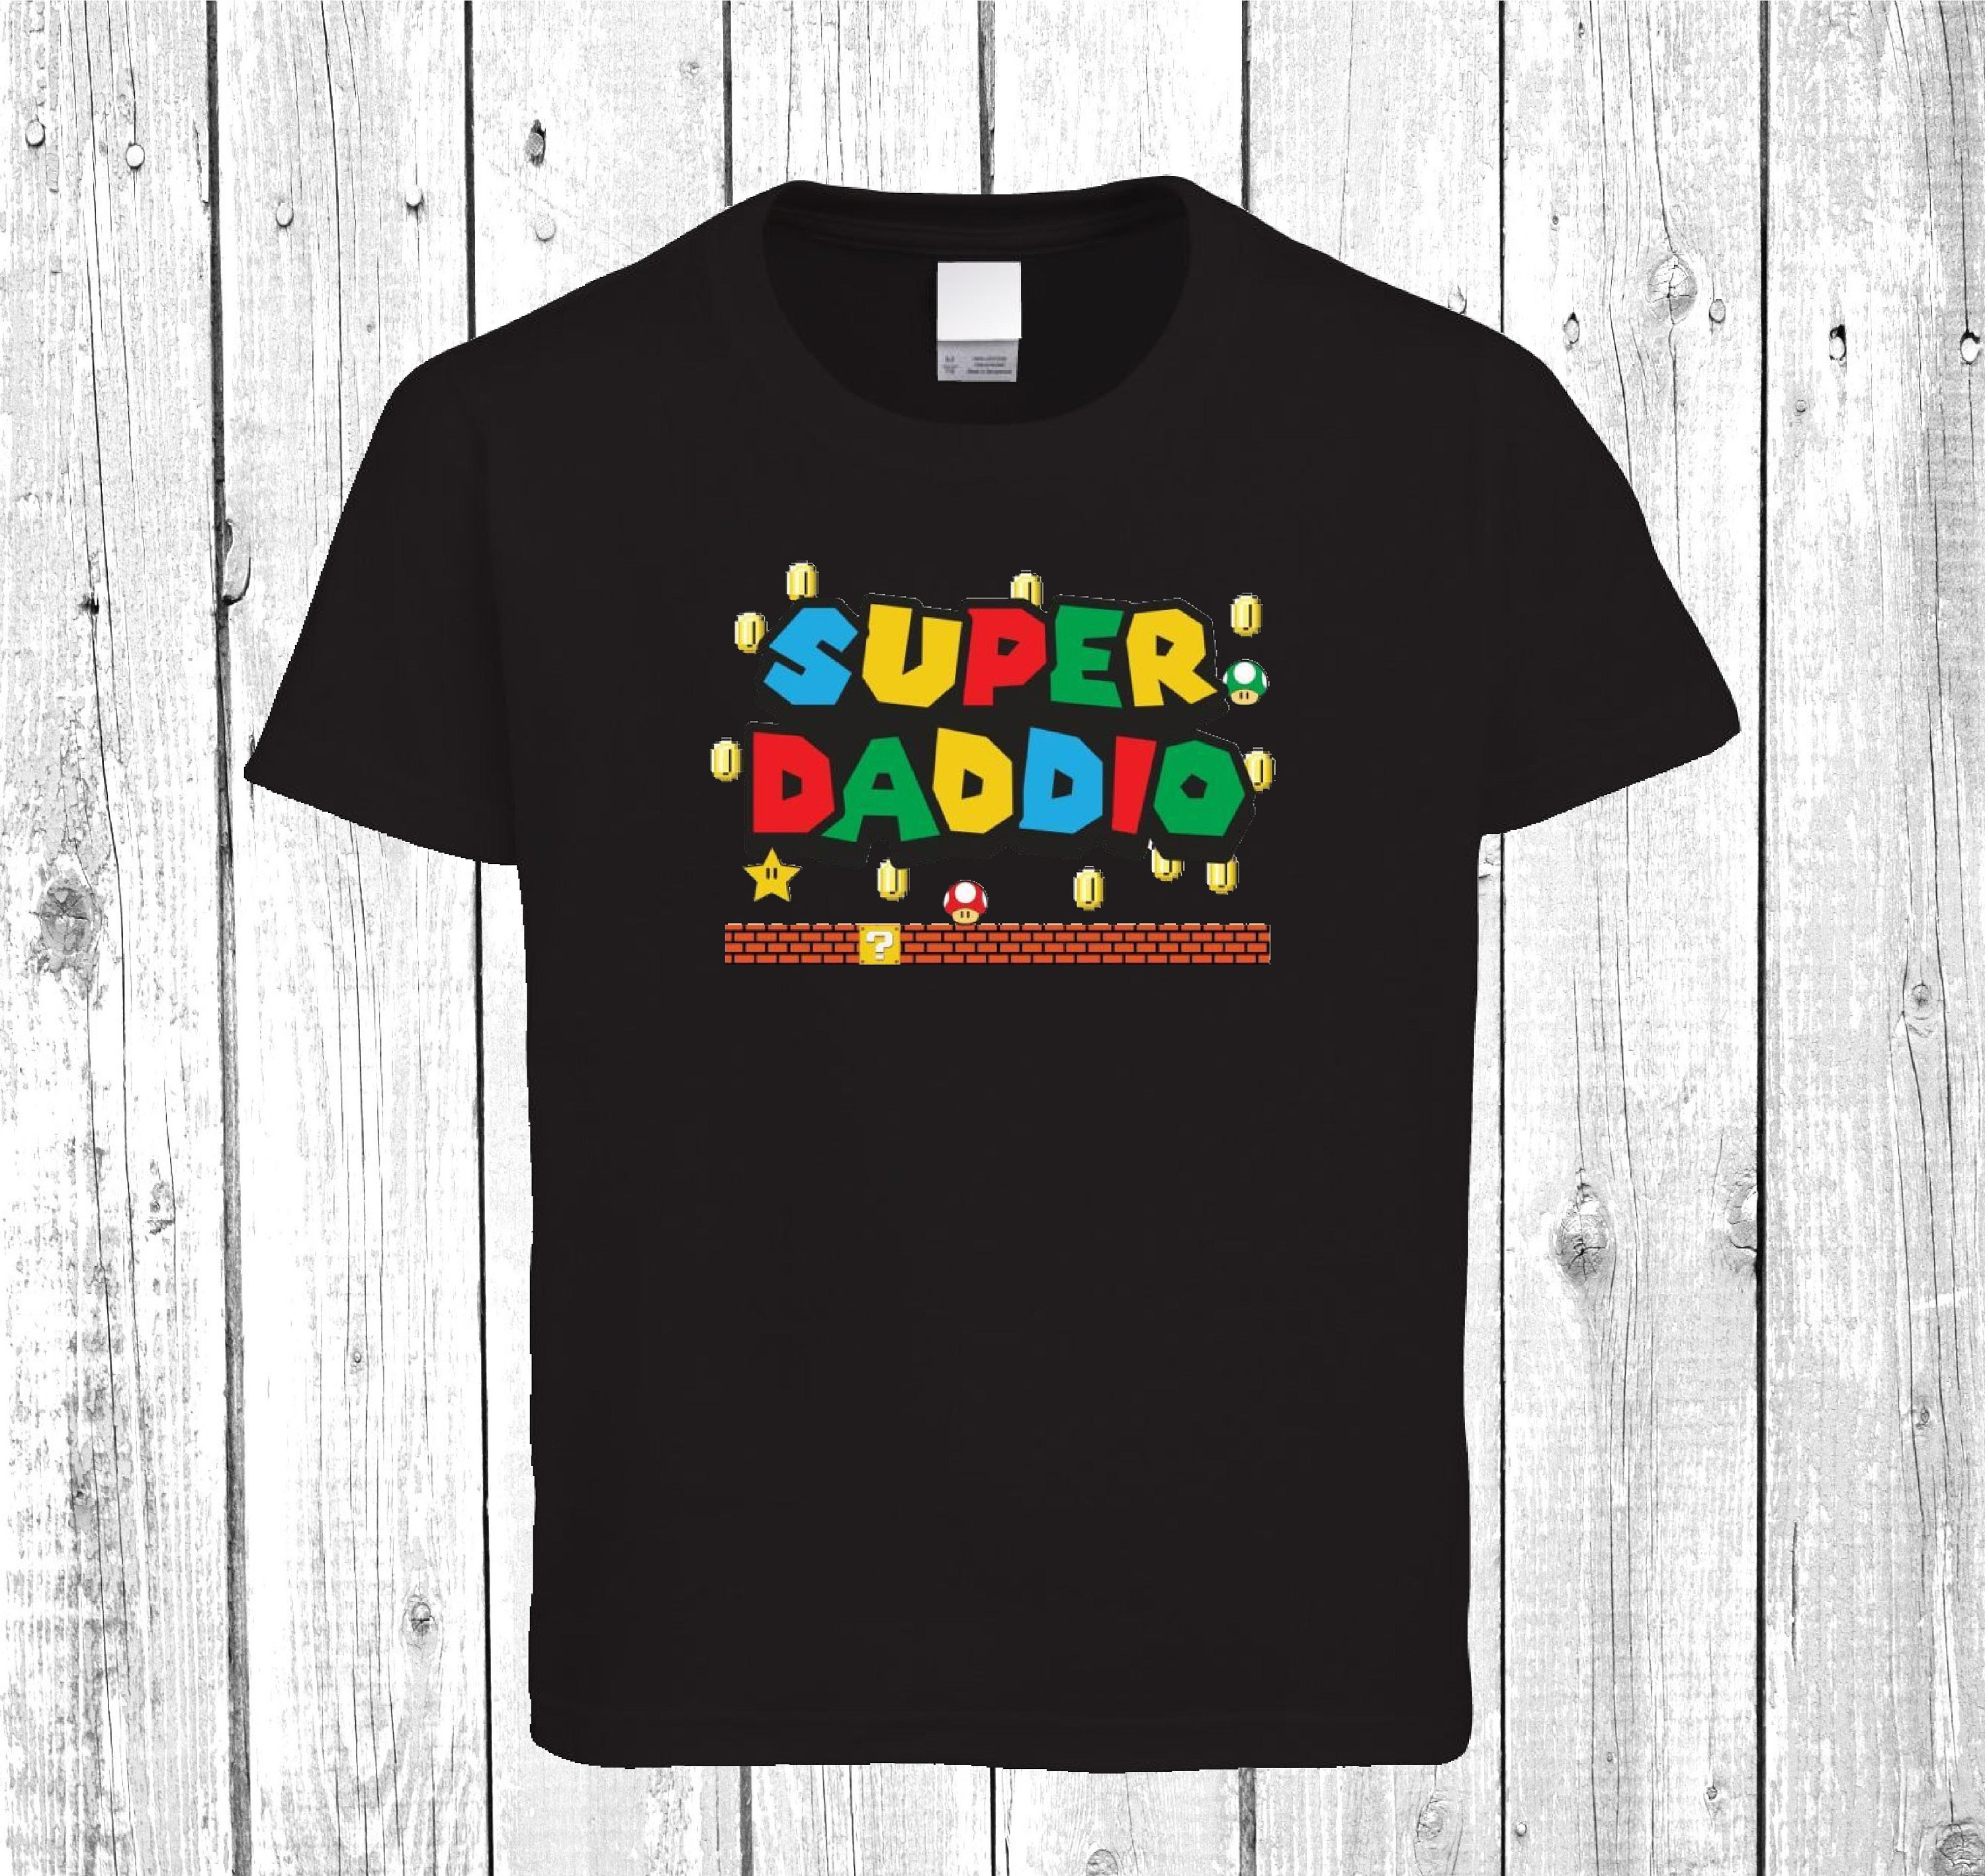 tit spænding nær ved SUPER MARIO TSHIRT Super Daddio Fathers Day Christmas - Etsy